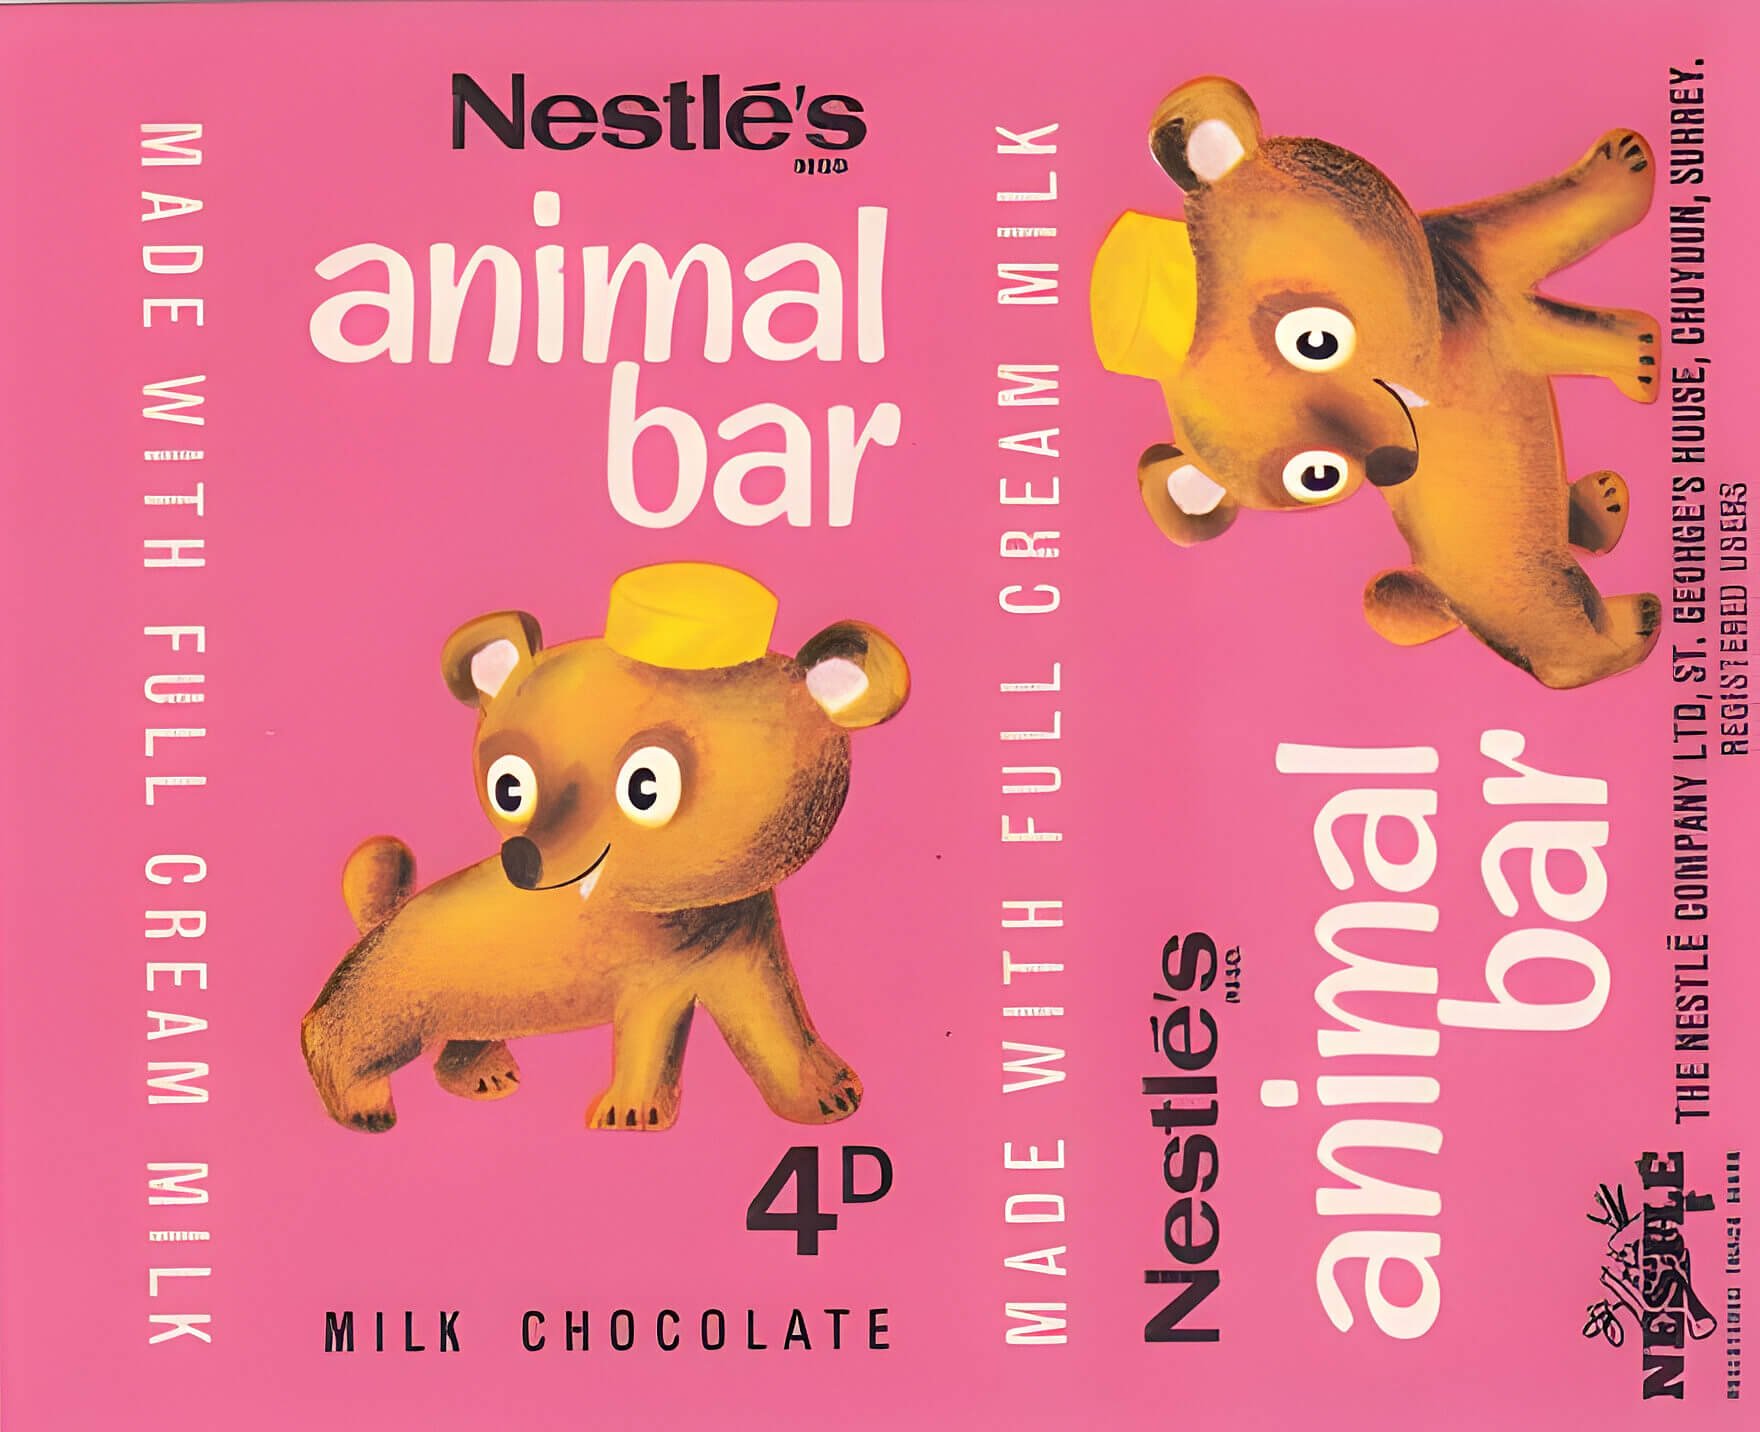 Nestle Animal Bar pink wrapper featuring a bear, from 1960s, price 4D.